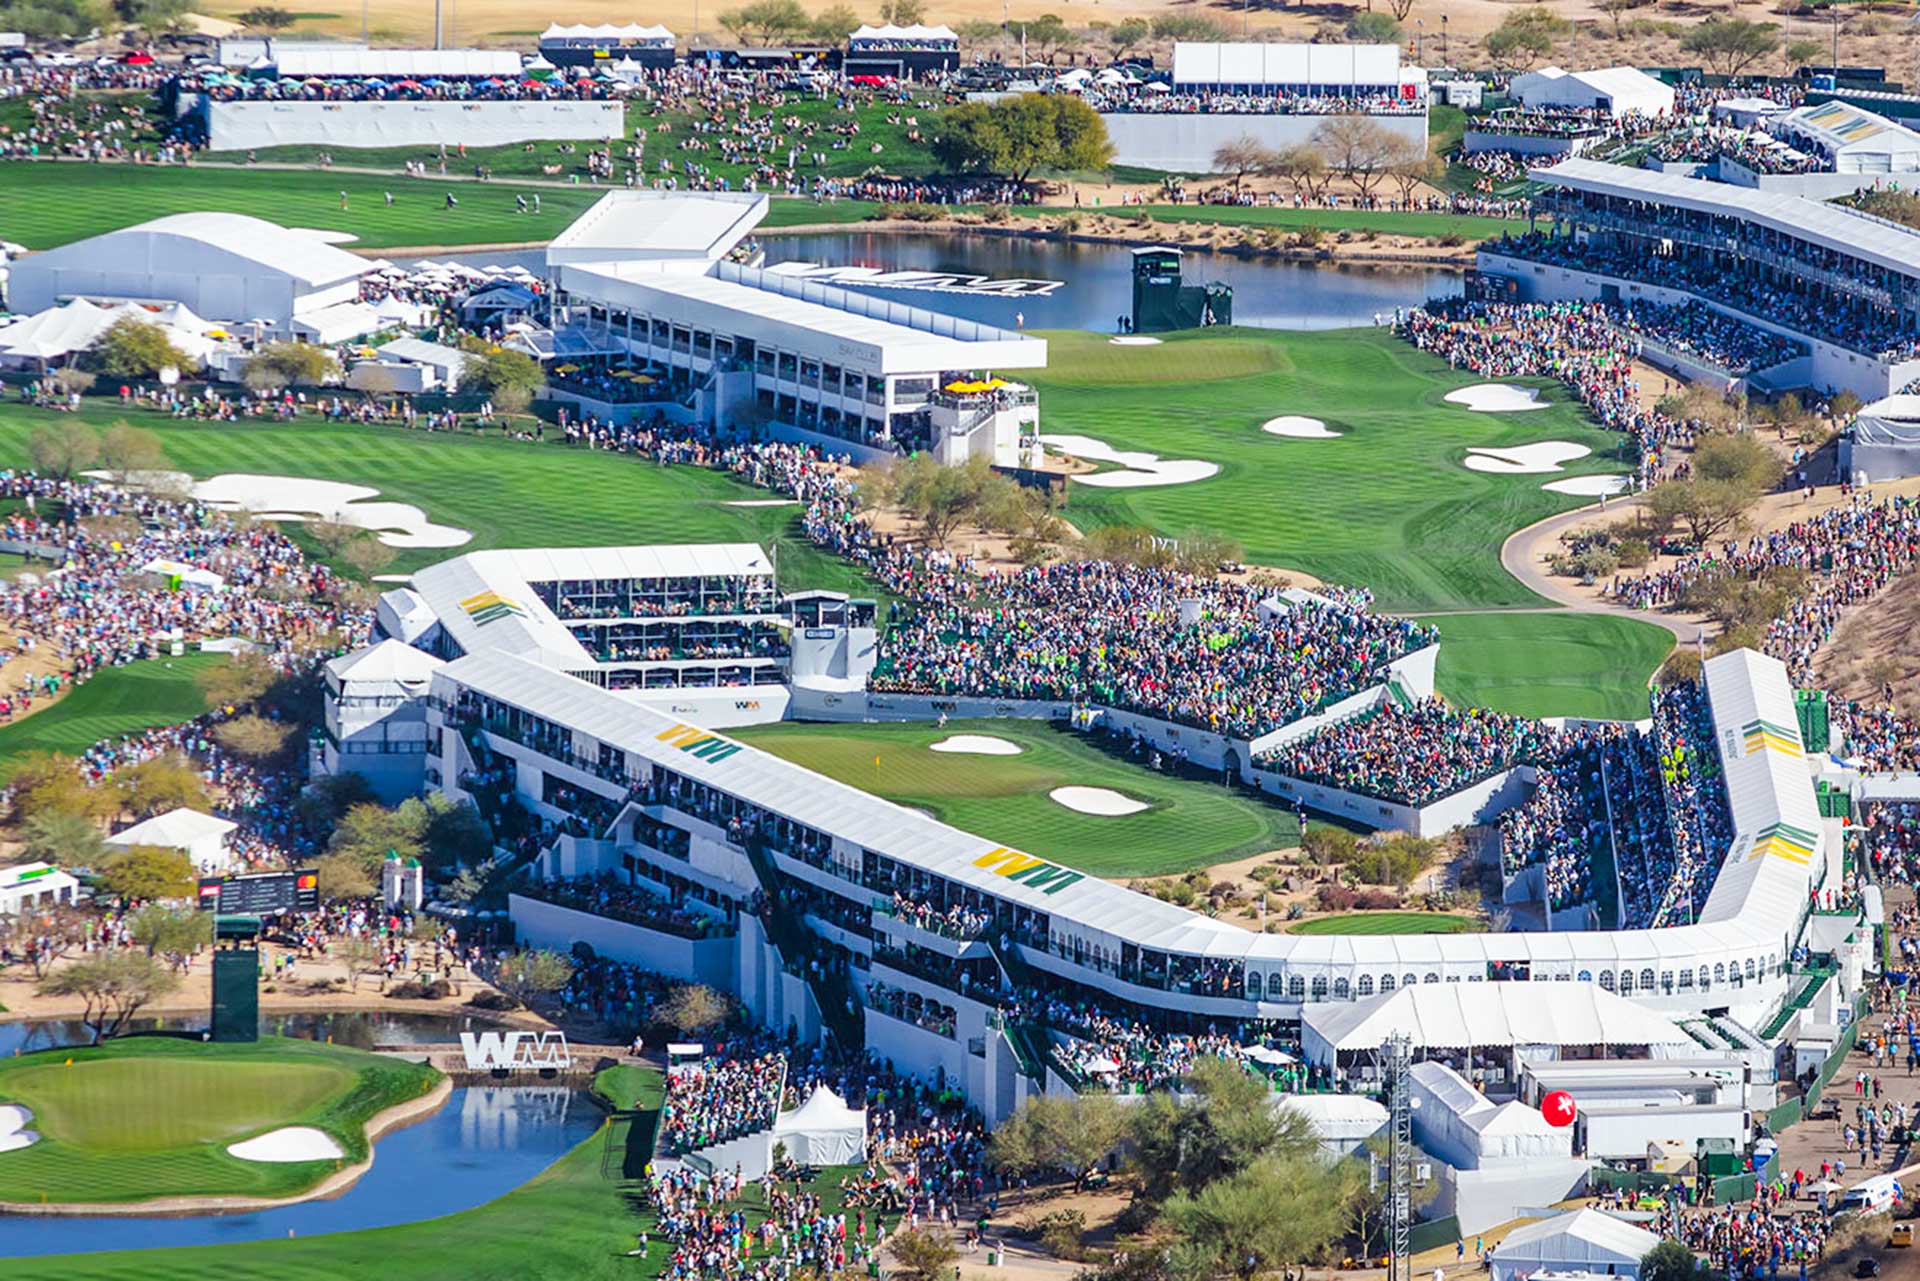 What to Wear to the Phoenix Open 2019